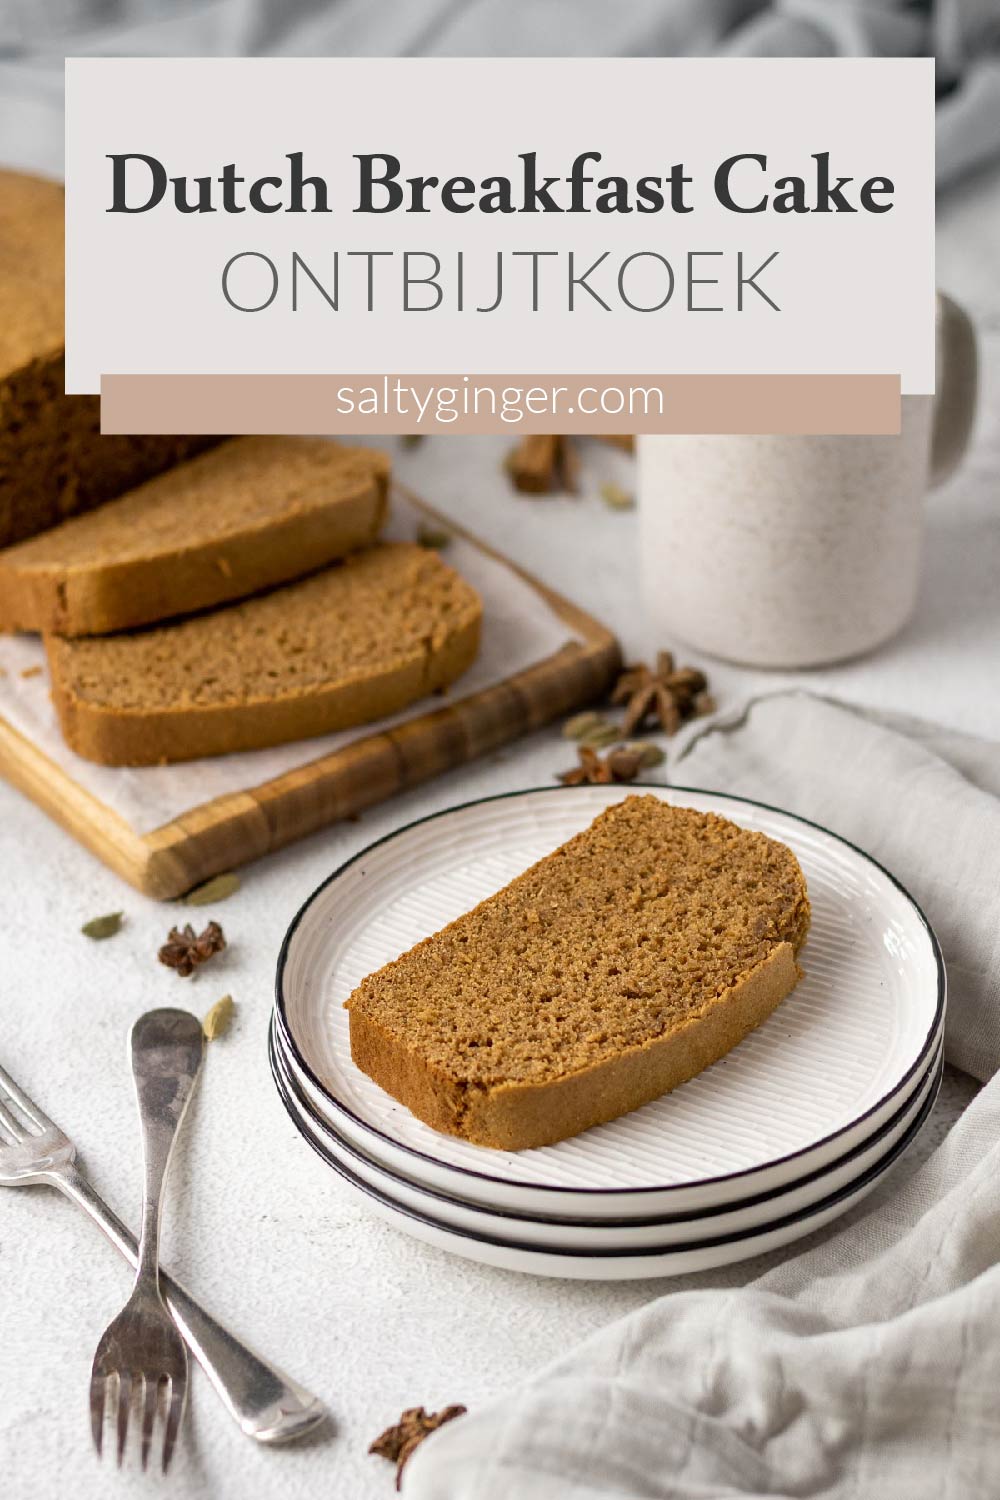 Sliced ontbitjkoek on plates with a cup of coffee.